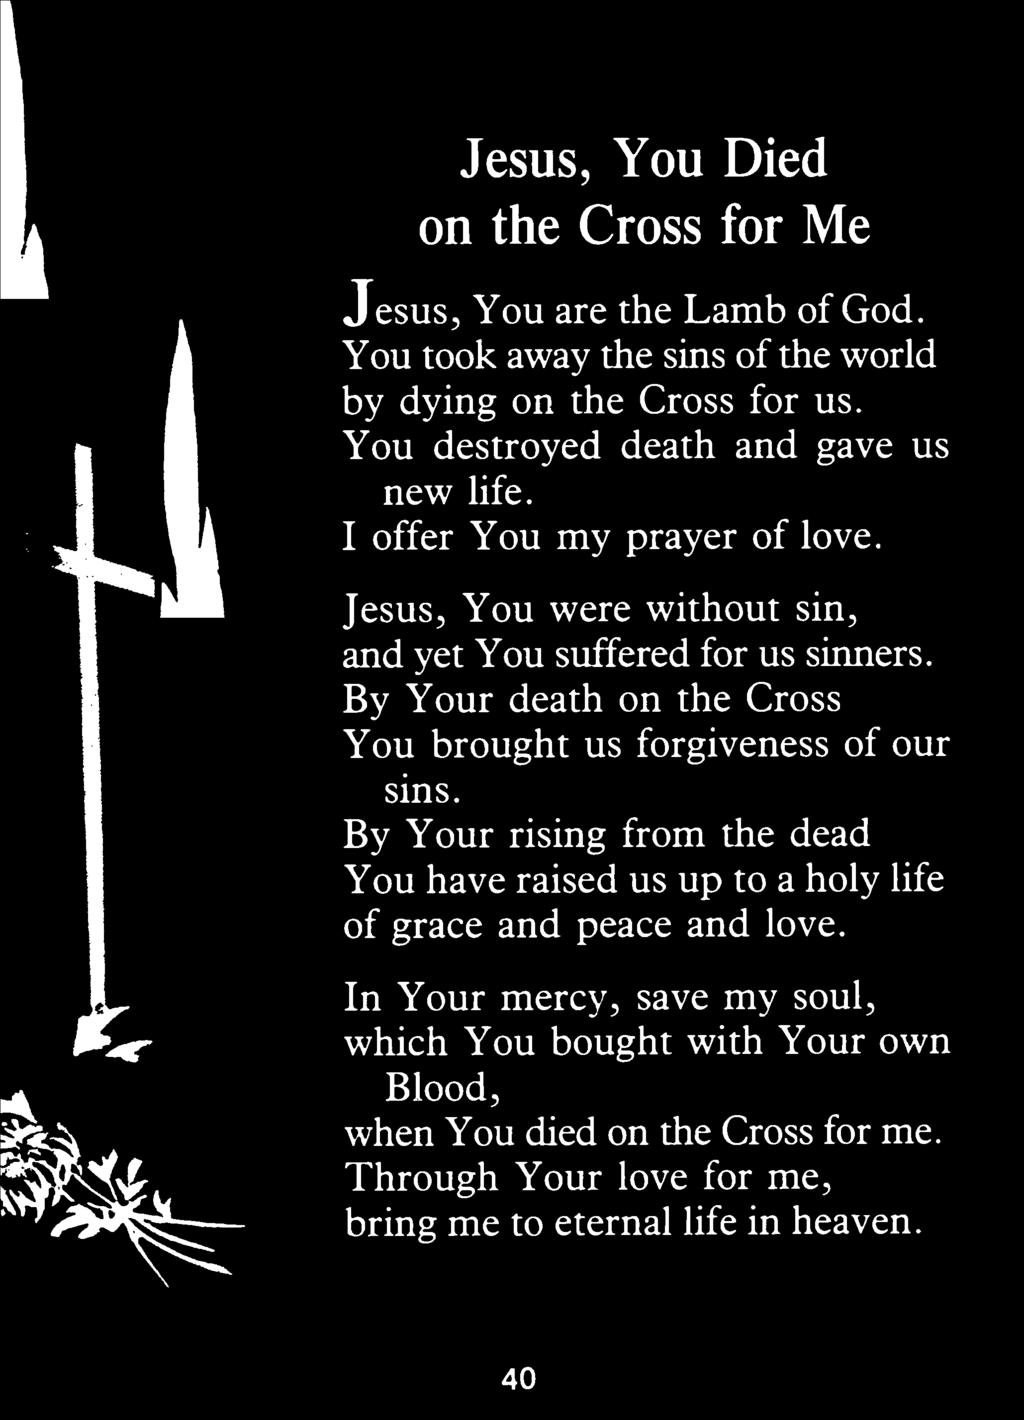 By Your death on the Cross You brought us forgiveness of our sins.